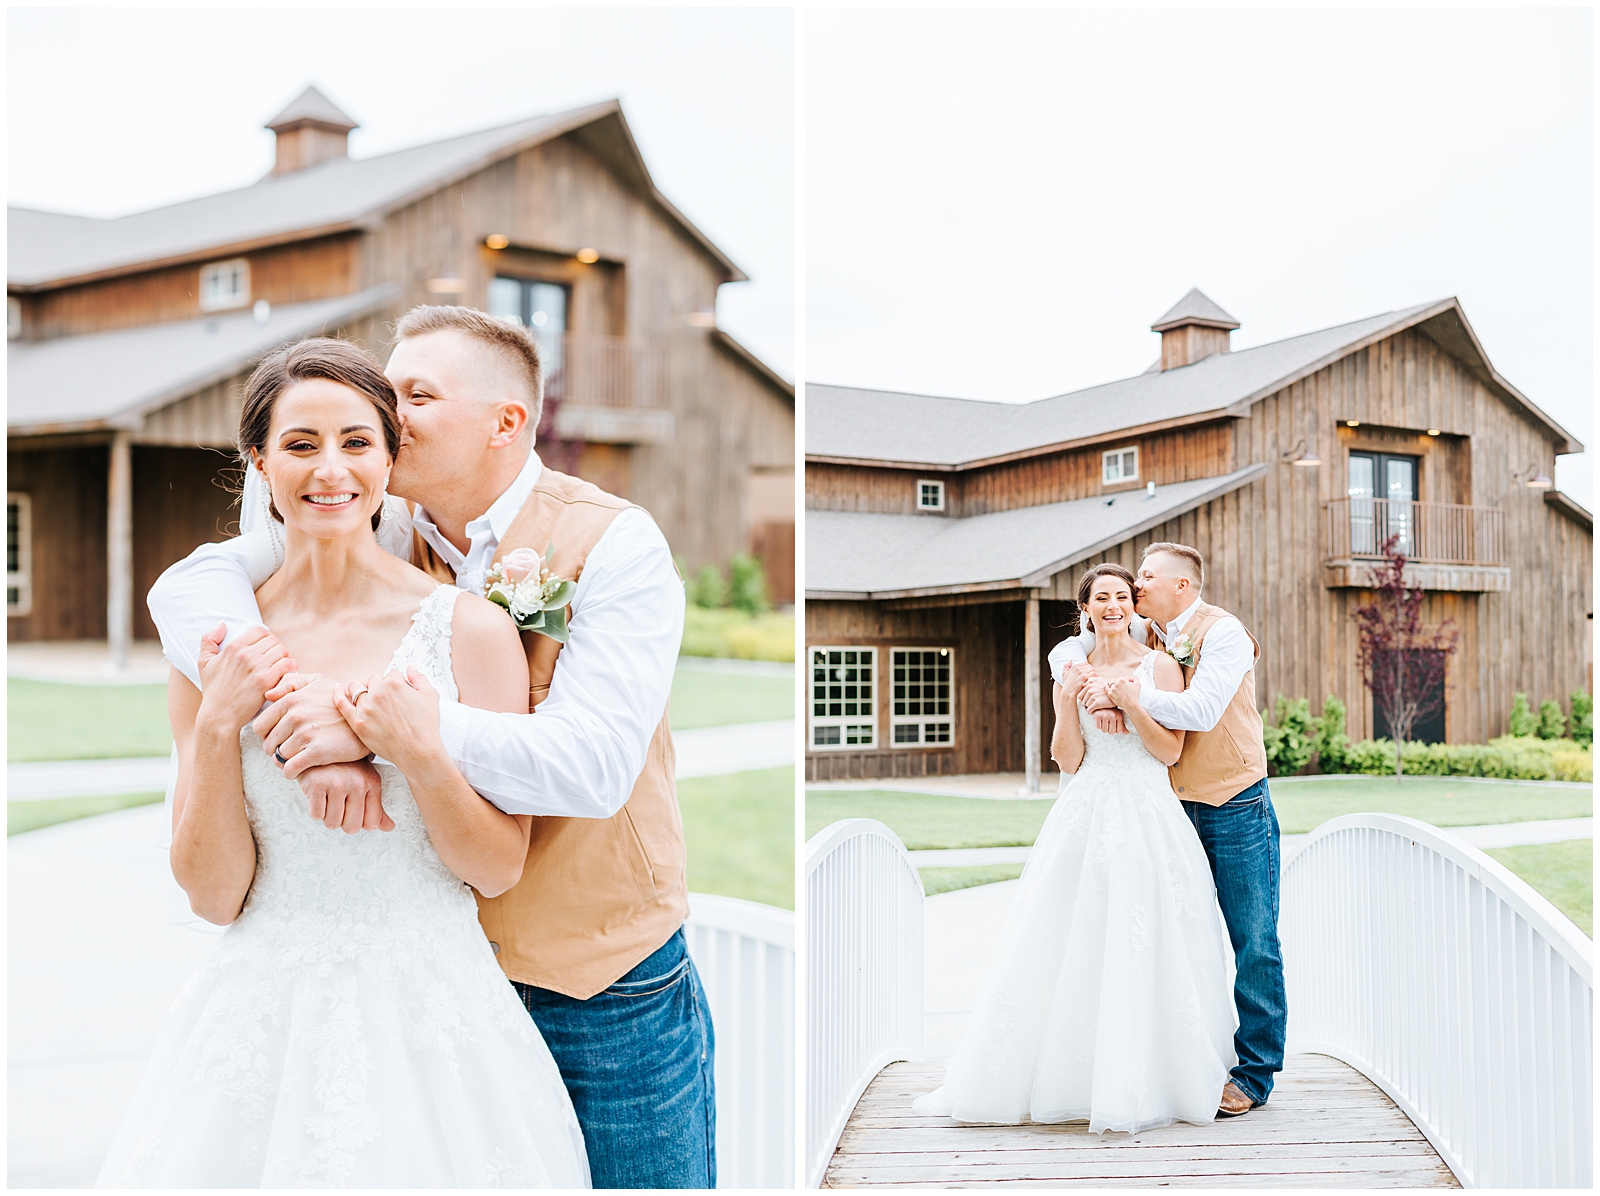 Rustic Barn at Country Chic Still Water Hollow Wedding